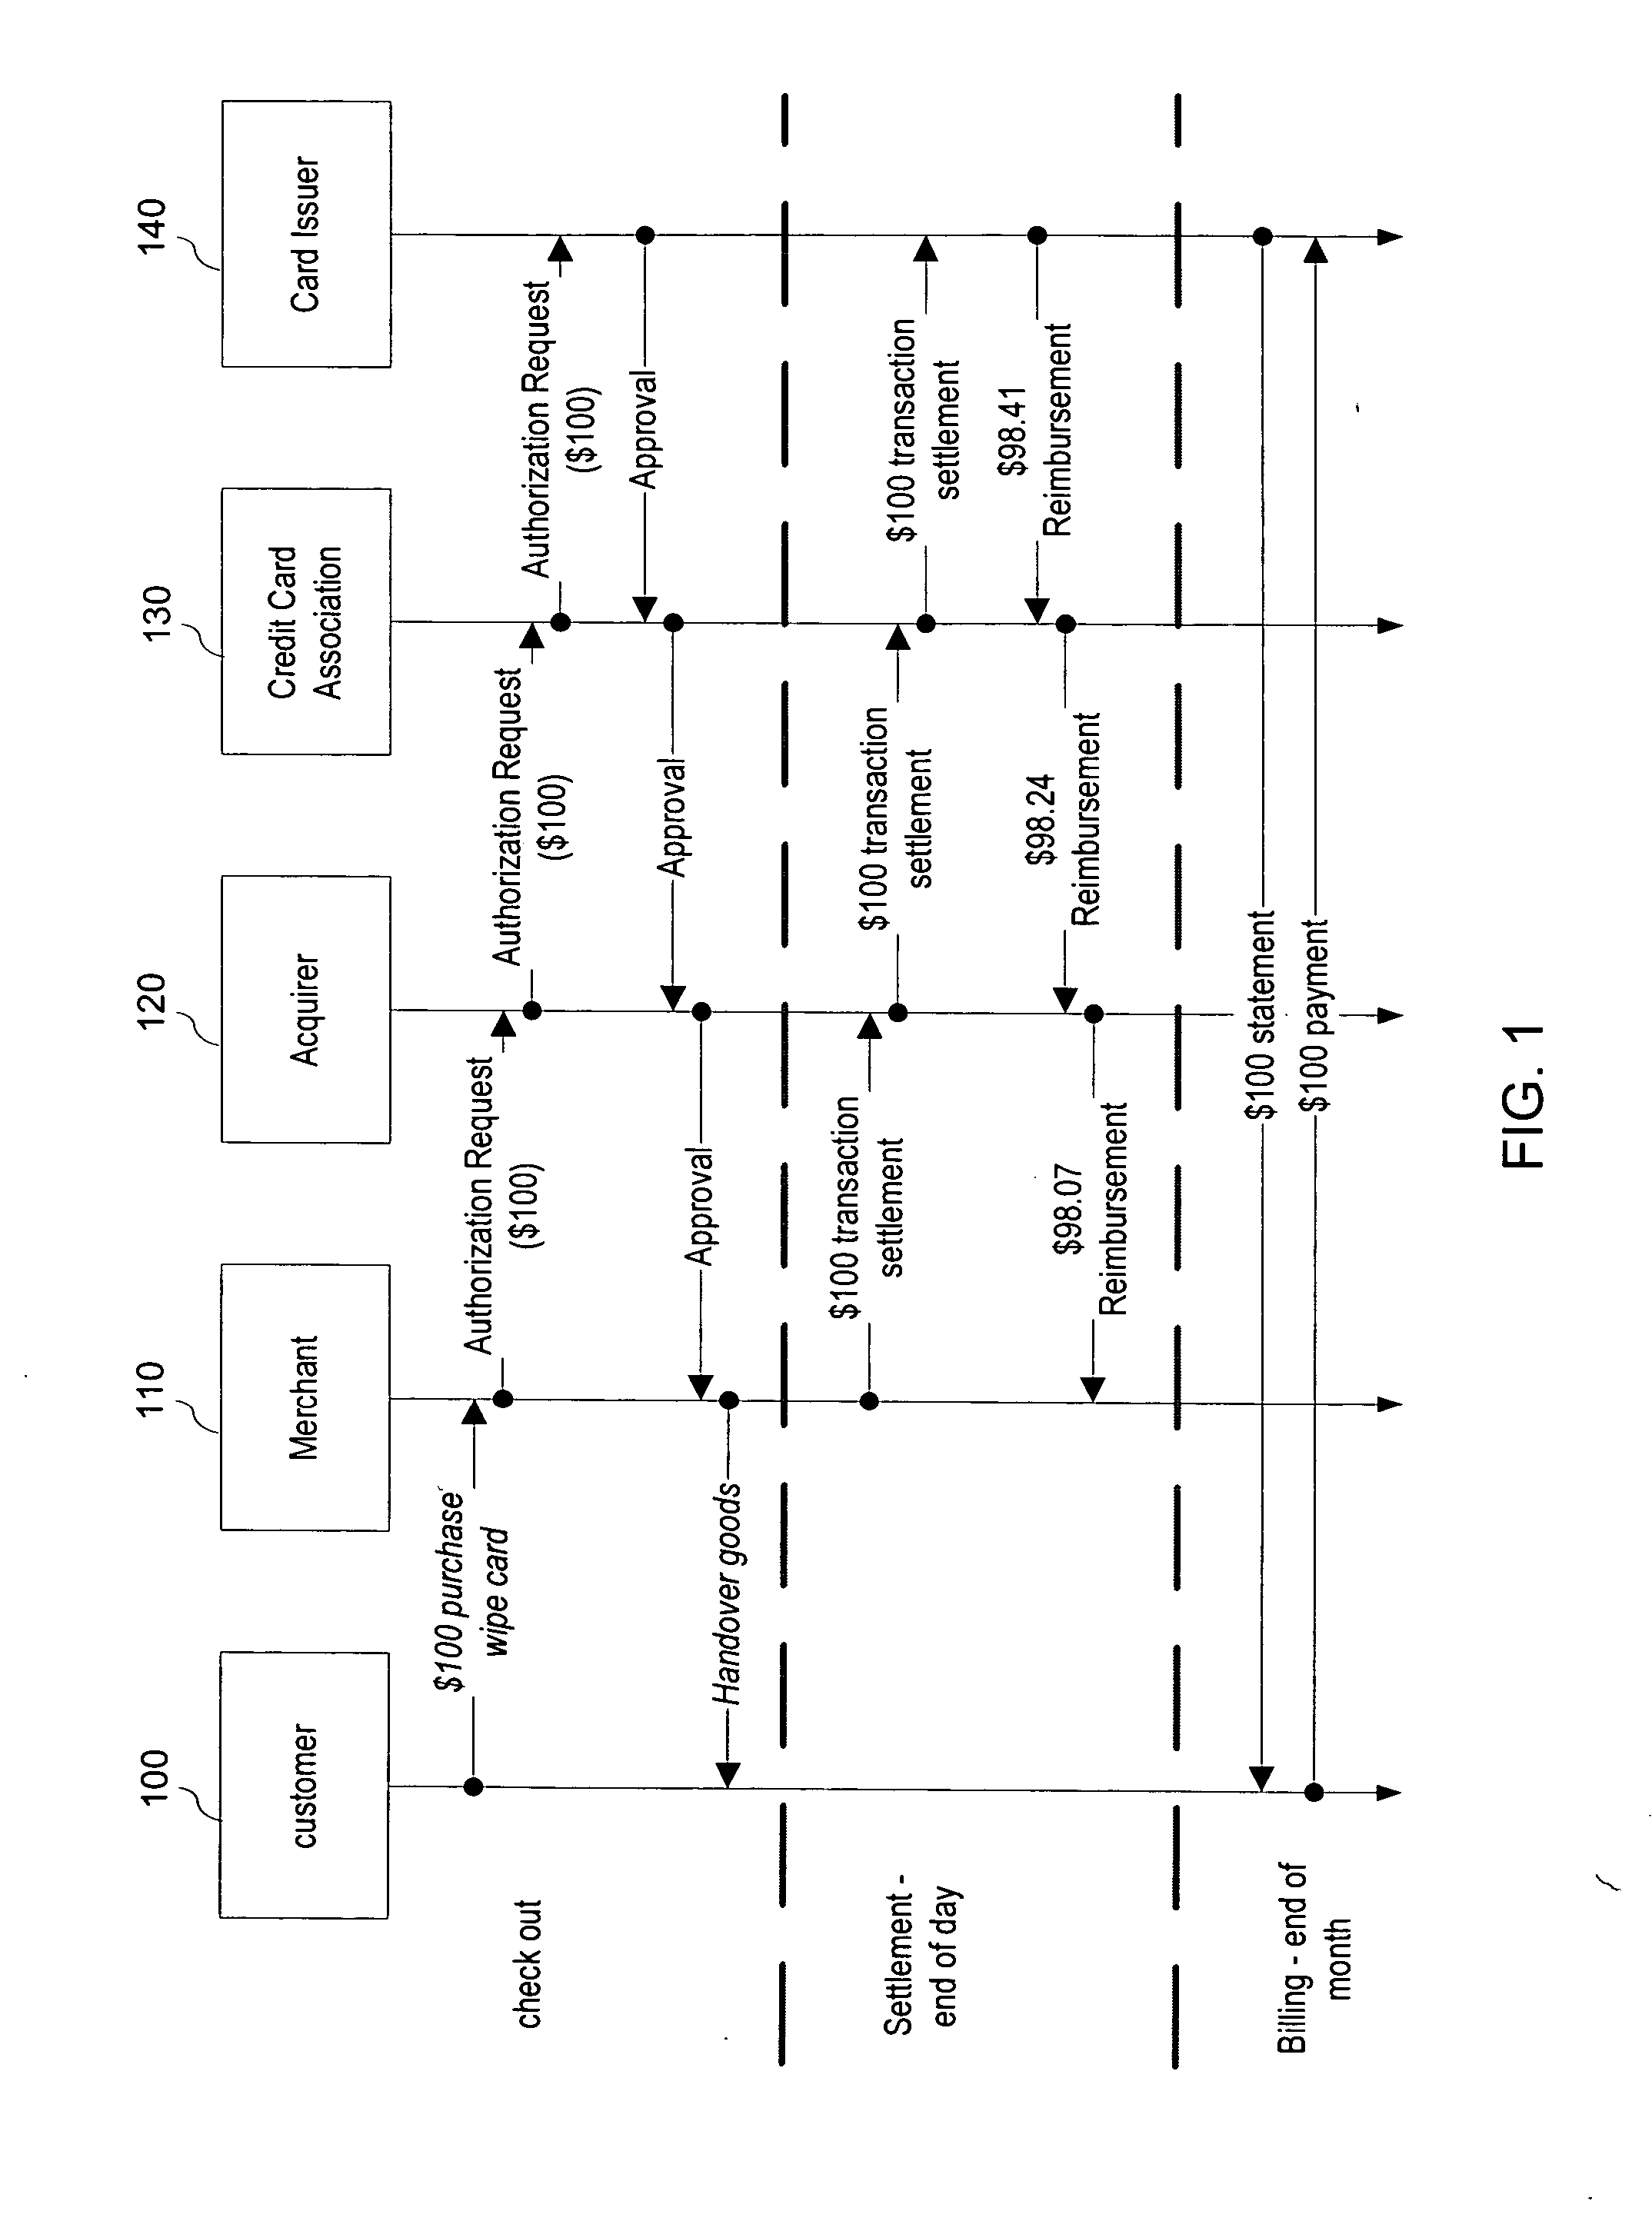 System and method for securely making payments and deposits